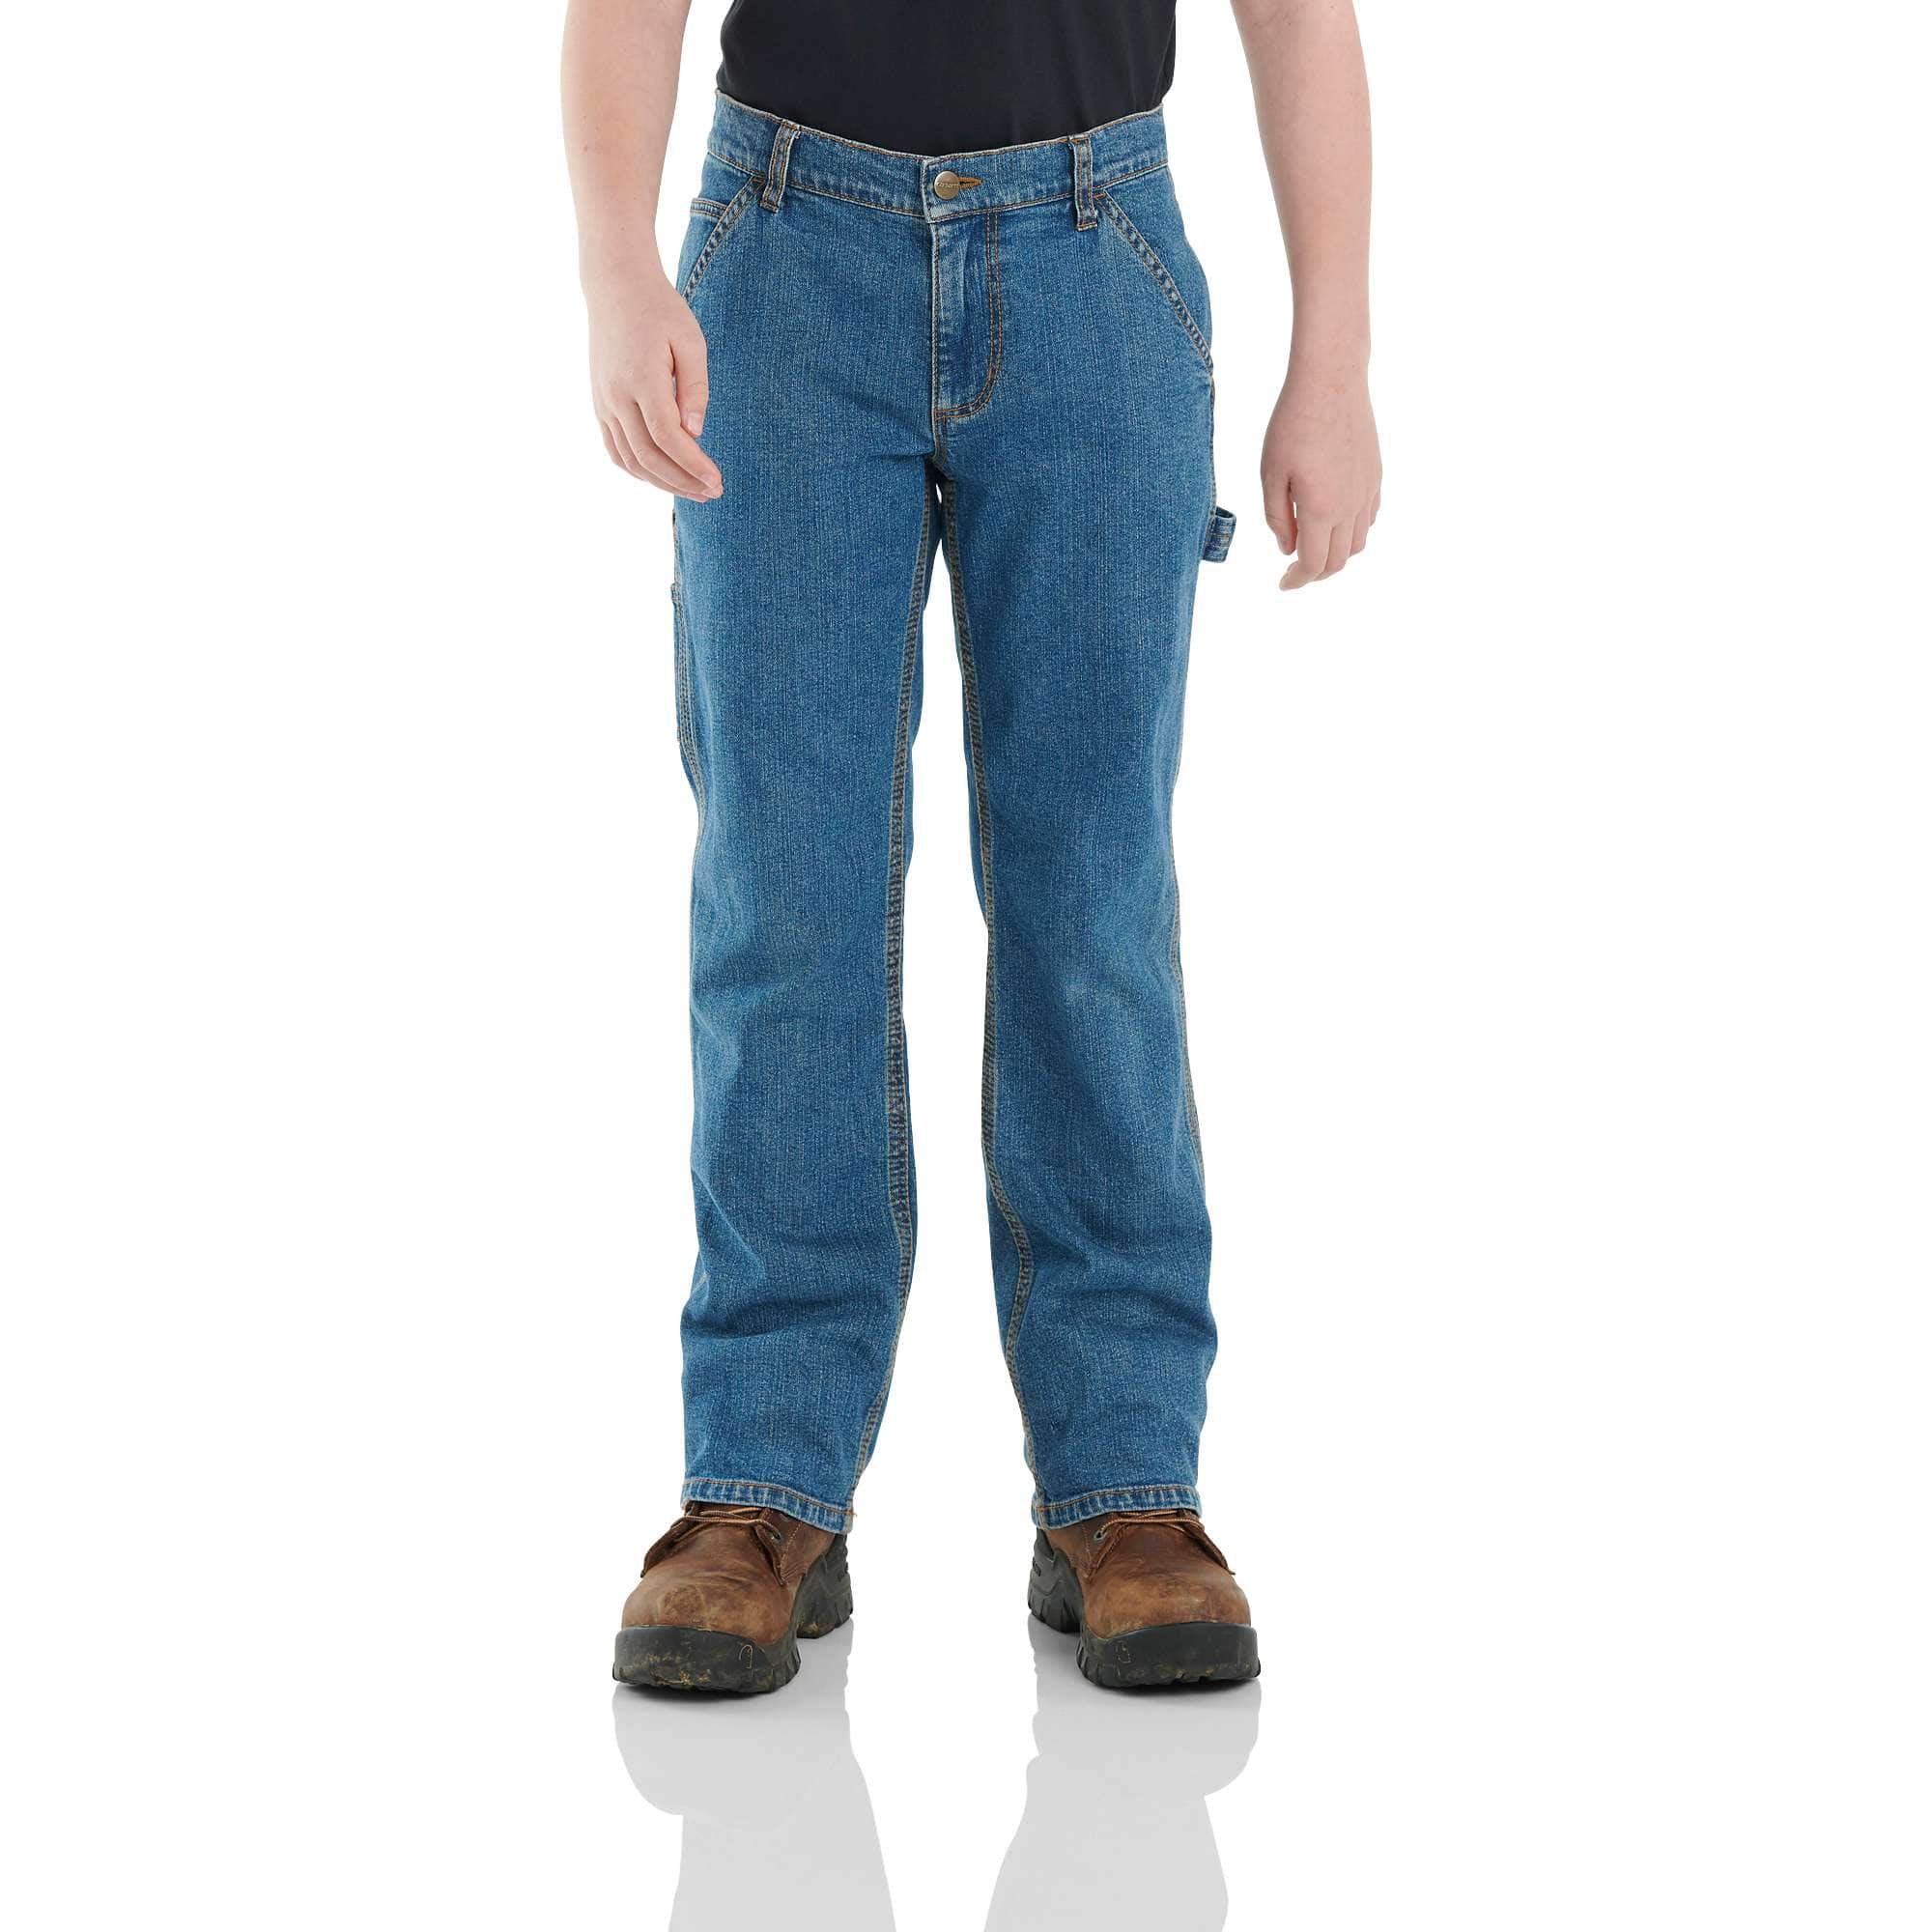 Carhartt Boys' Mid-Rise Lined Canvas Dungaree Pants with Adjustable Waist  at Tractor Supply Co.